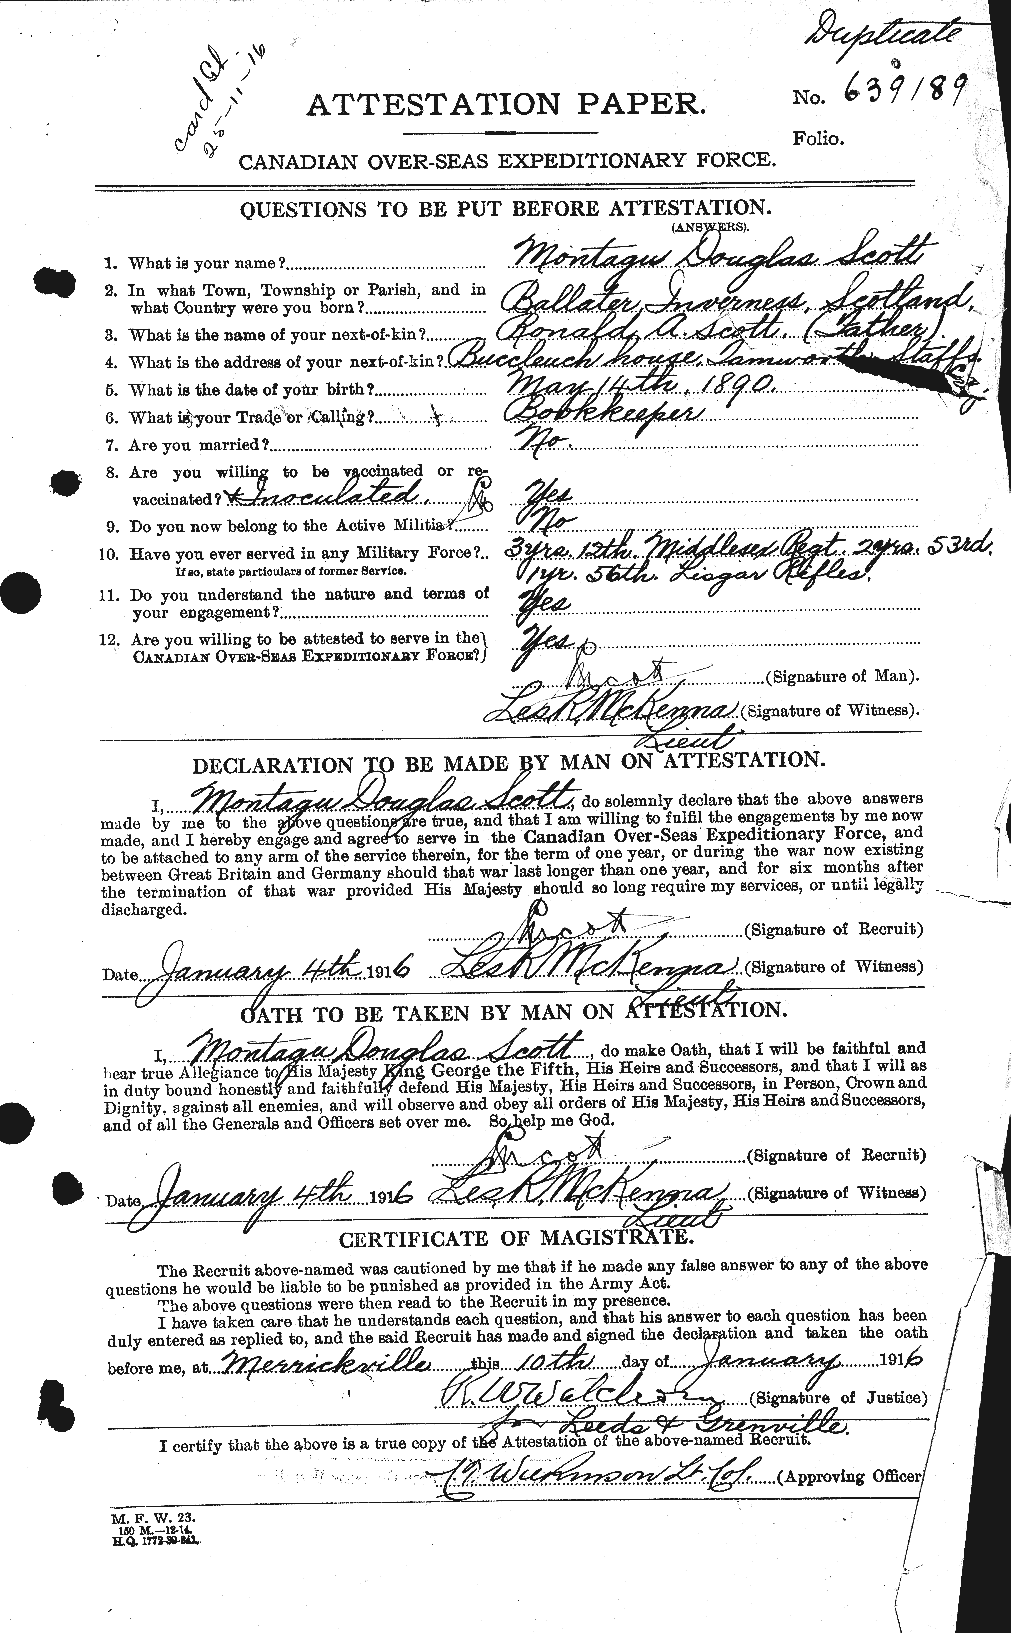 Personnel Records of the First World War - CEF 083490a